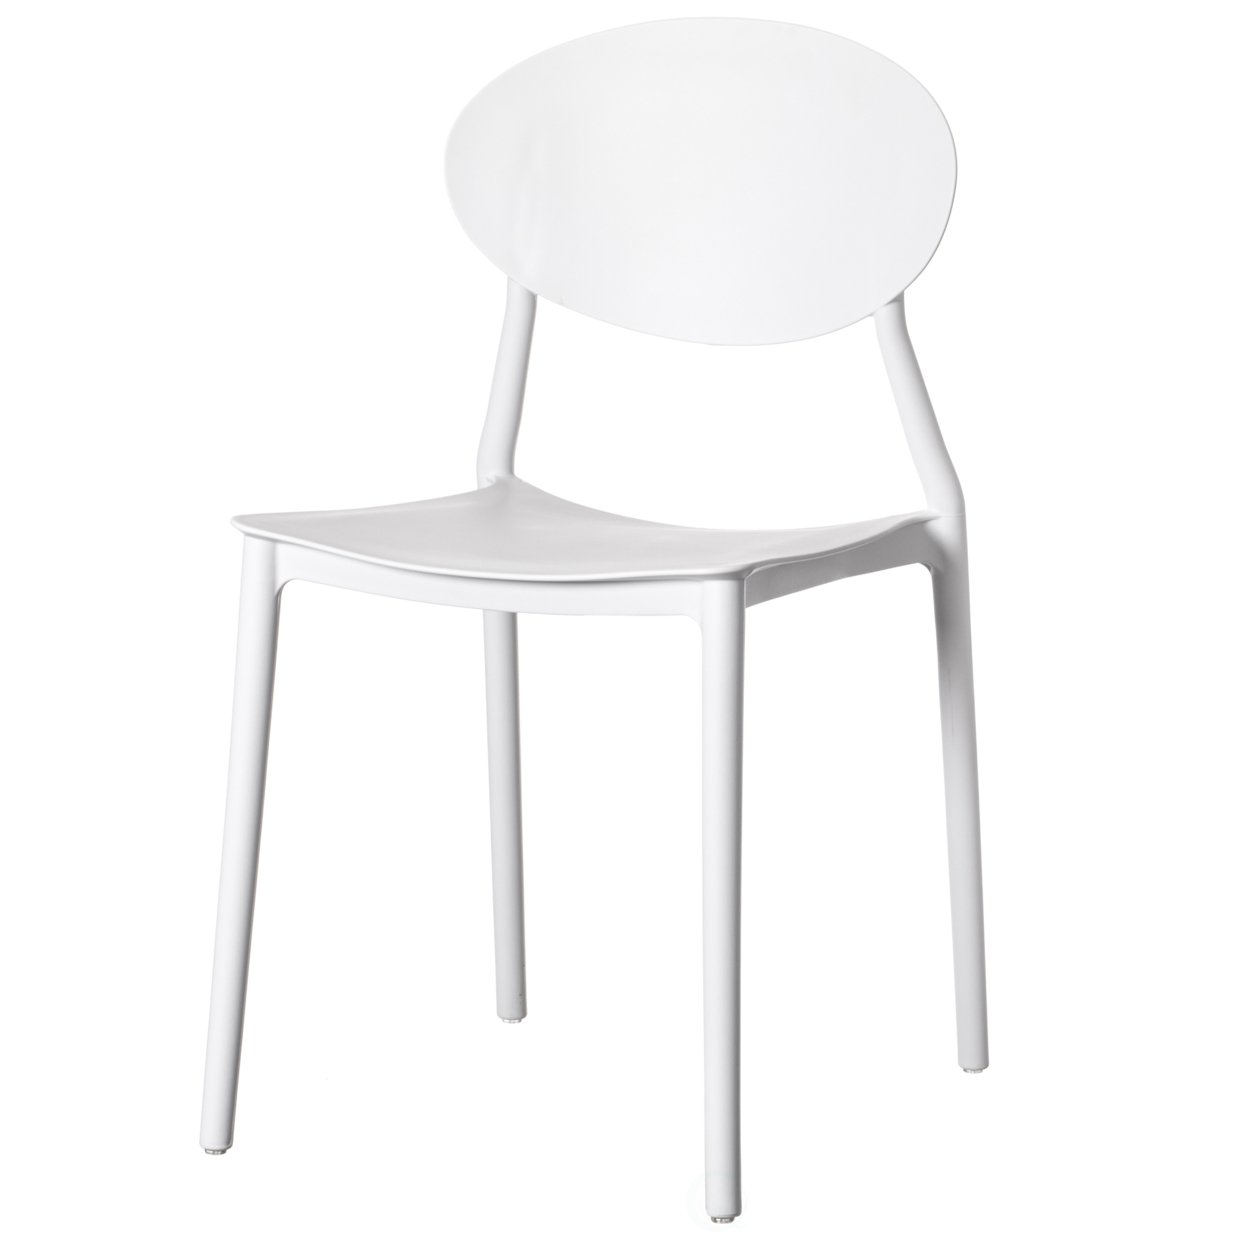 Modern Plastic Outdoor Dining Chair With Open Oval Back Design - Single White